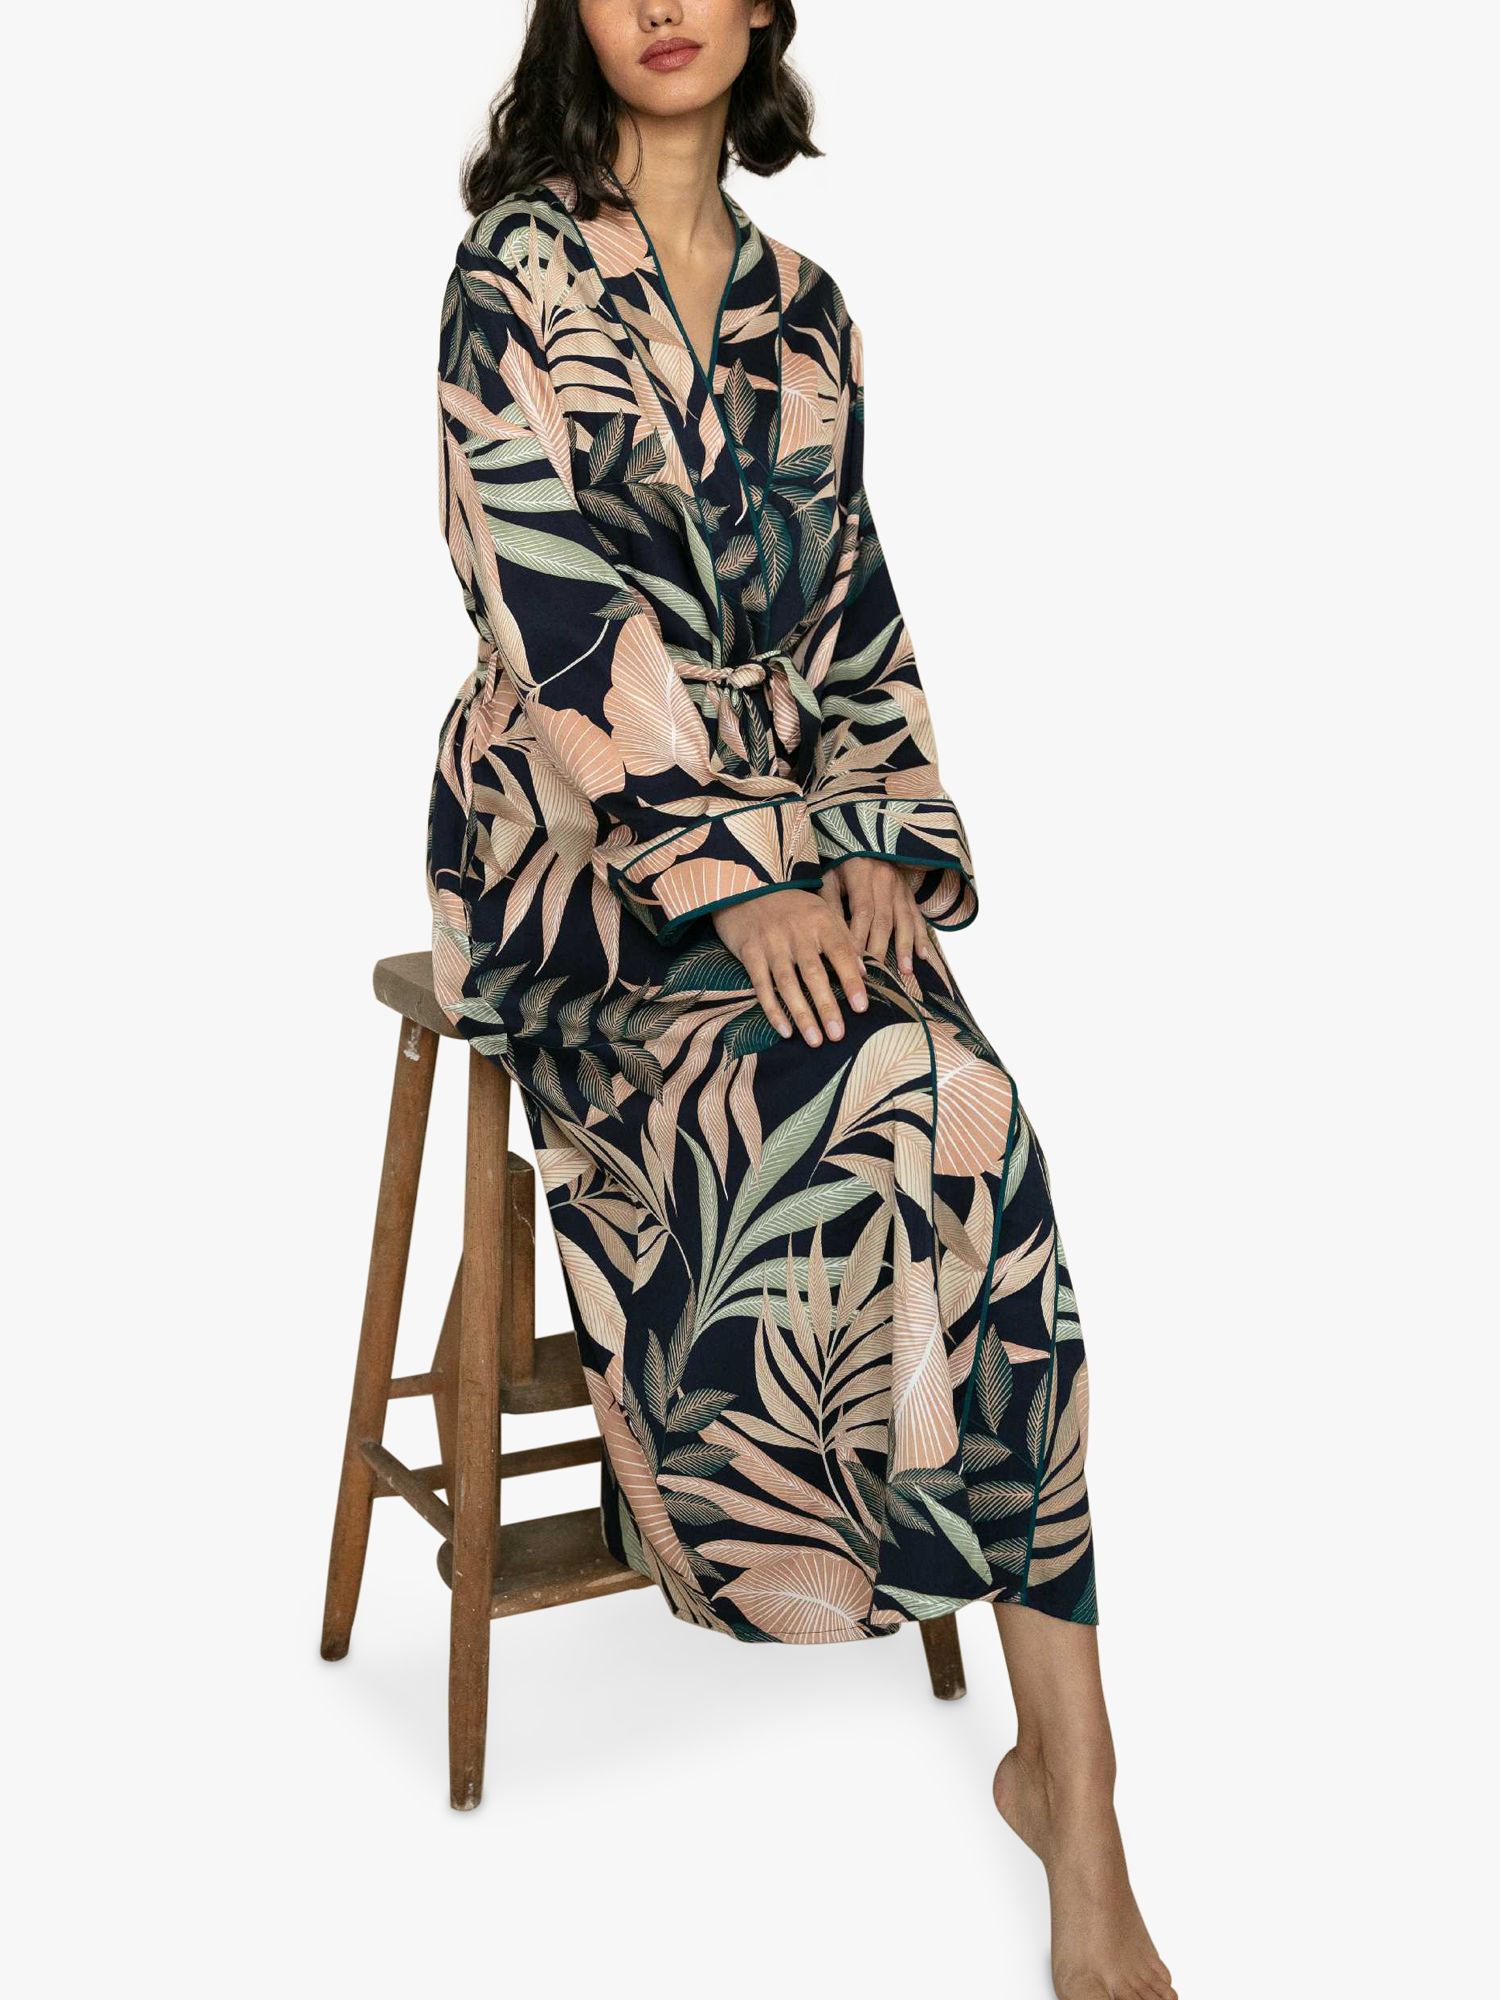 Buy Fable & Eve Leaf Print Dressing Gown, Navy Mix Online at johnlewis.com